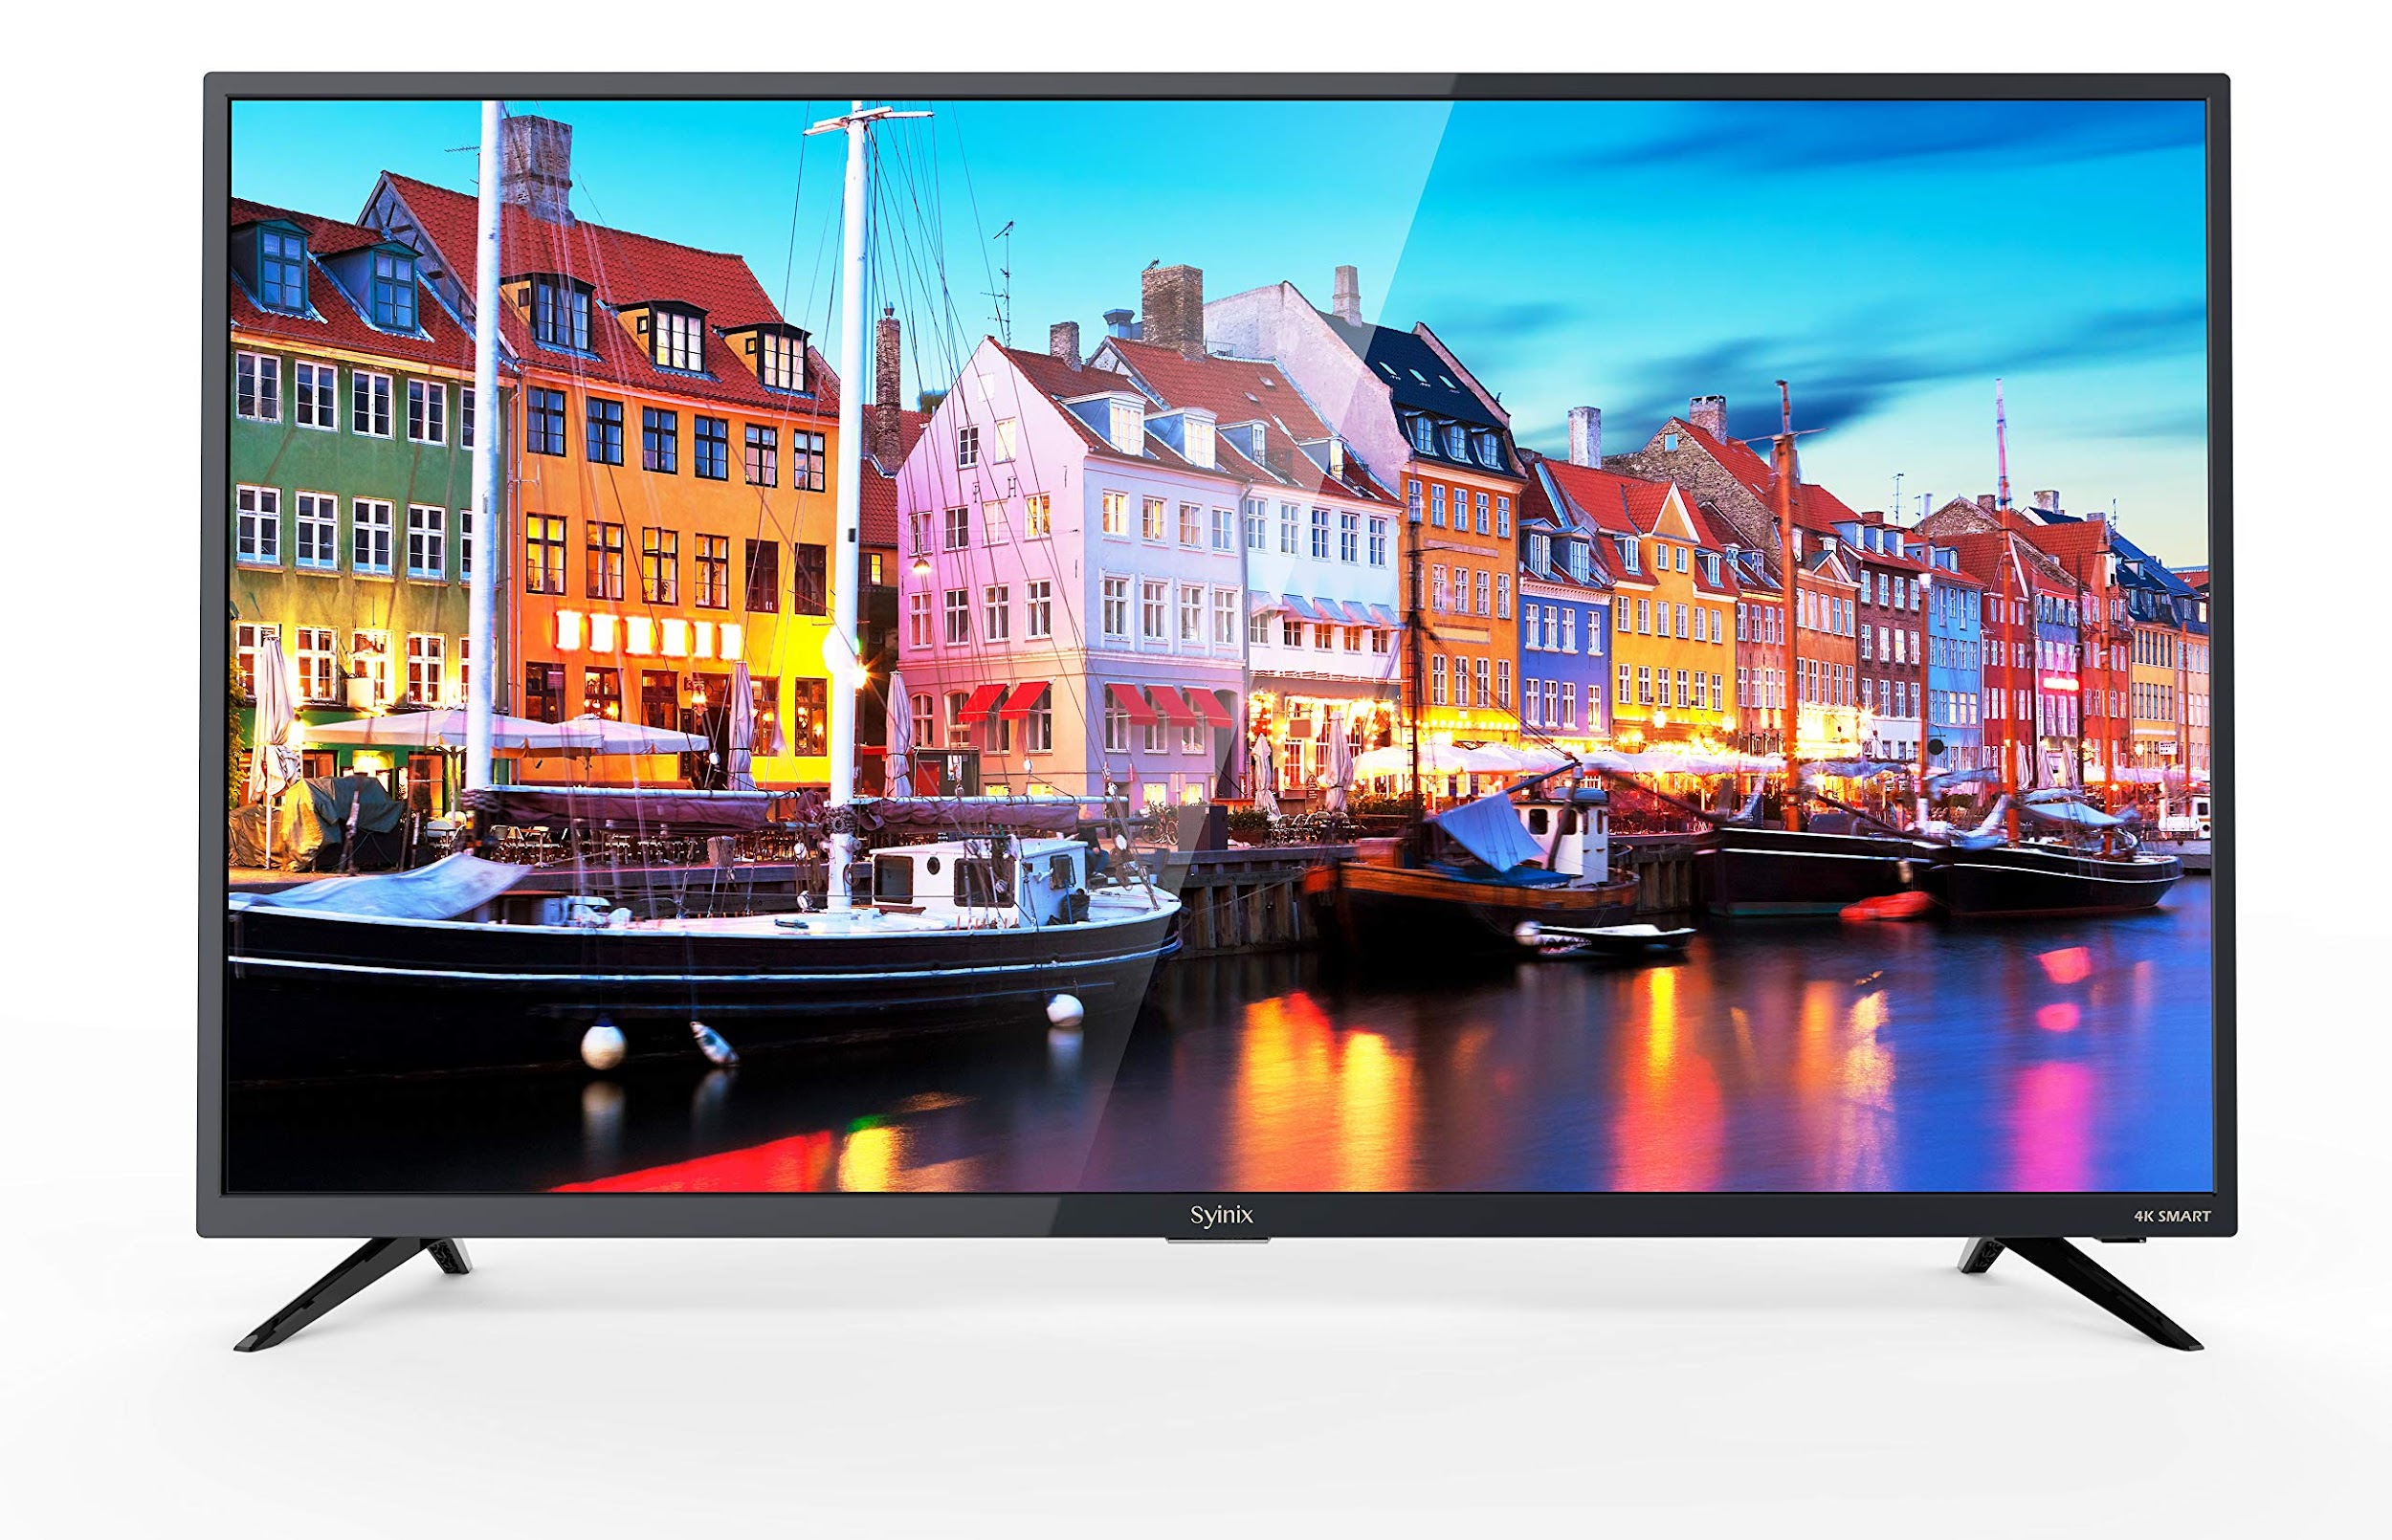 Syinix 50 Inch LED Ultra High Definition Android Smart TV